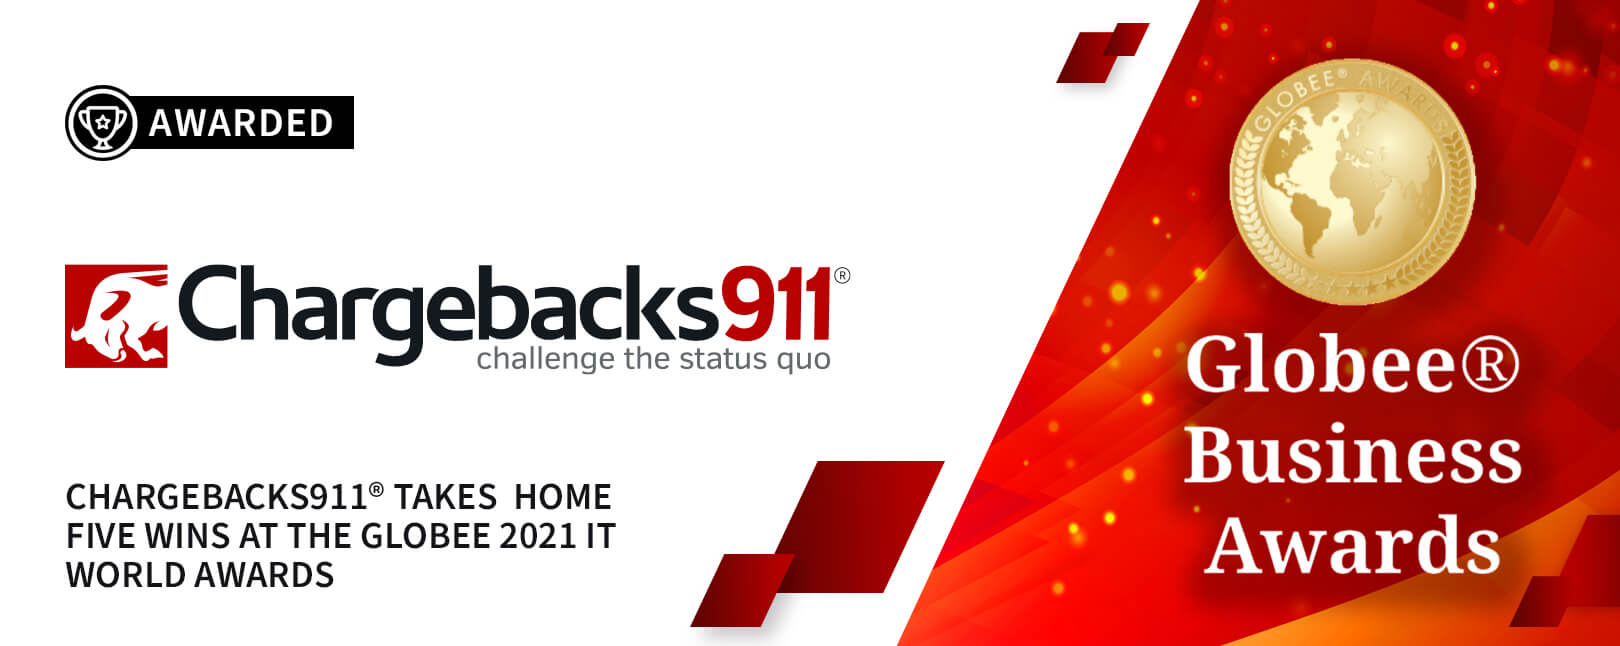 Chargebacks911® COO Named ‘Consumer Service Hero of the Year’!